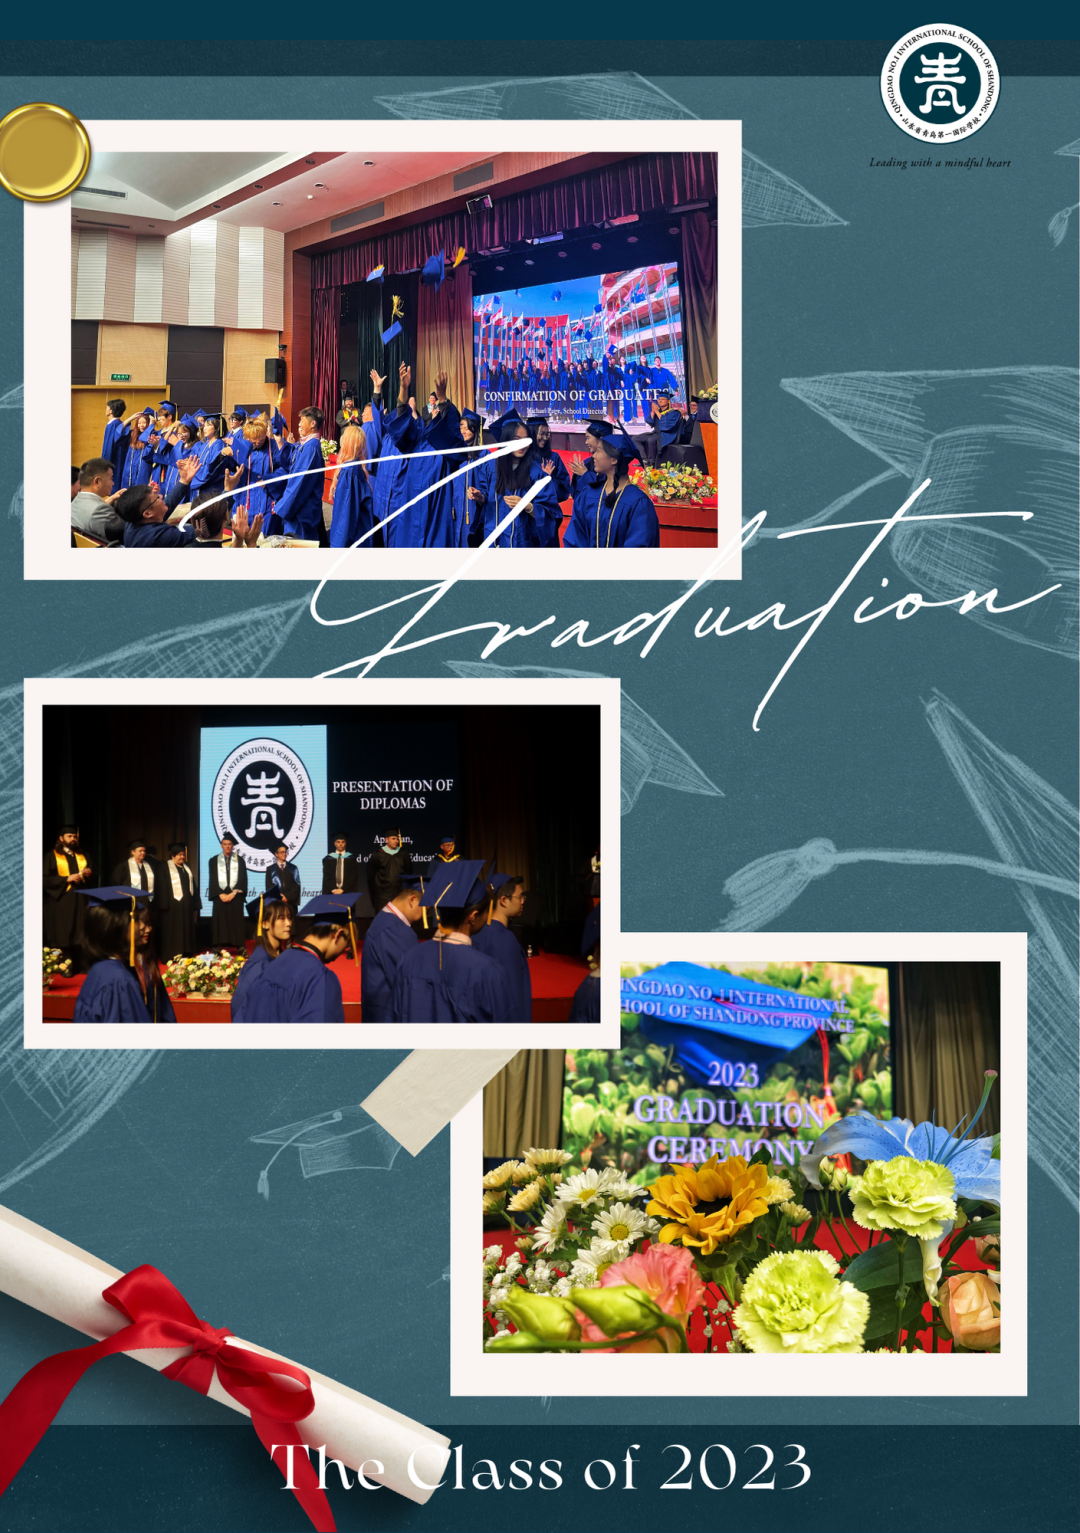 Congratulations to the Class of 2023! | QISS 2023届毕业典礼